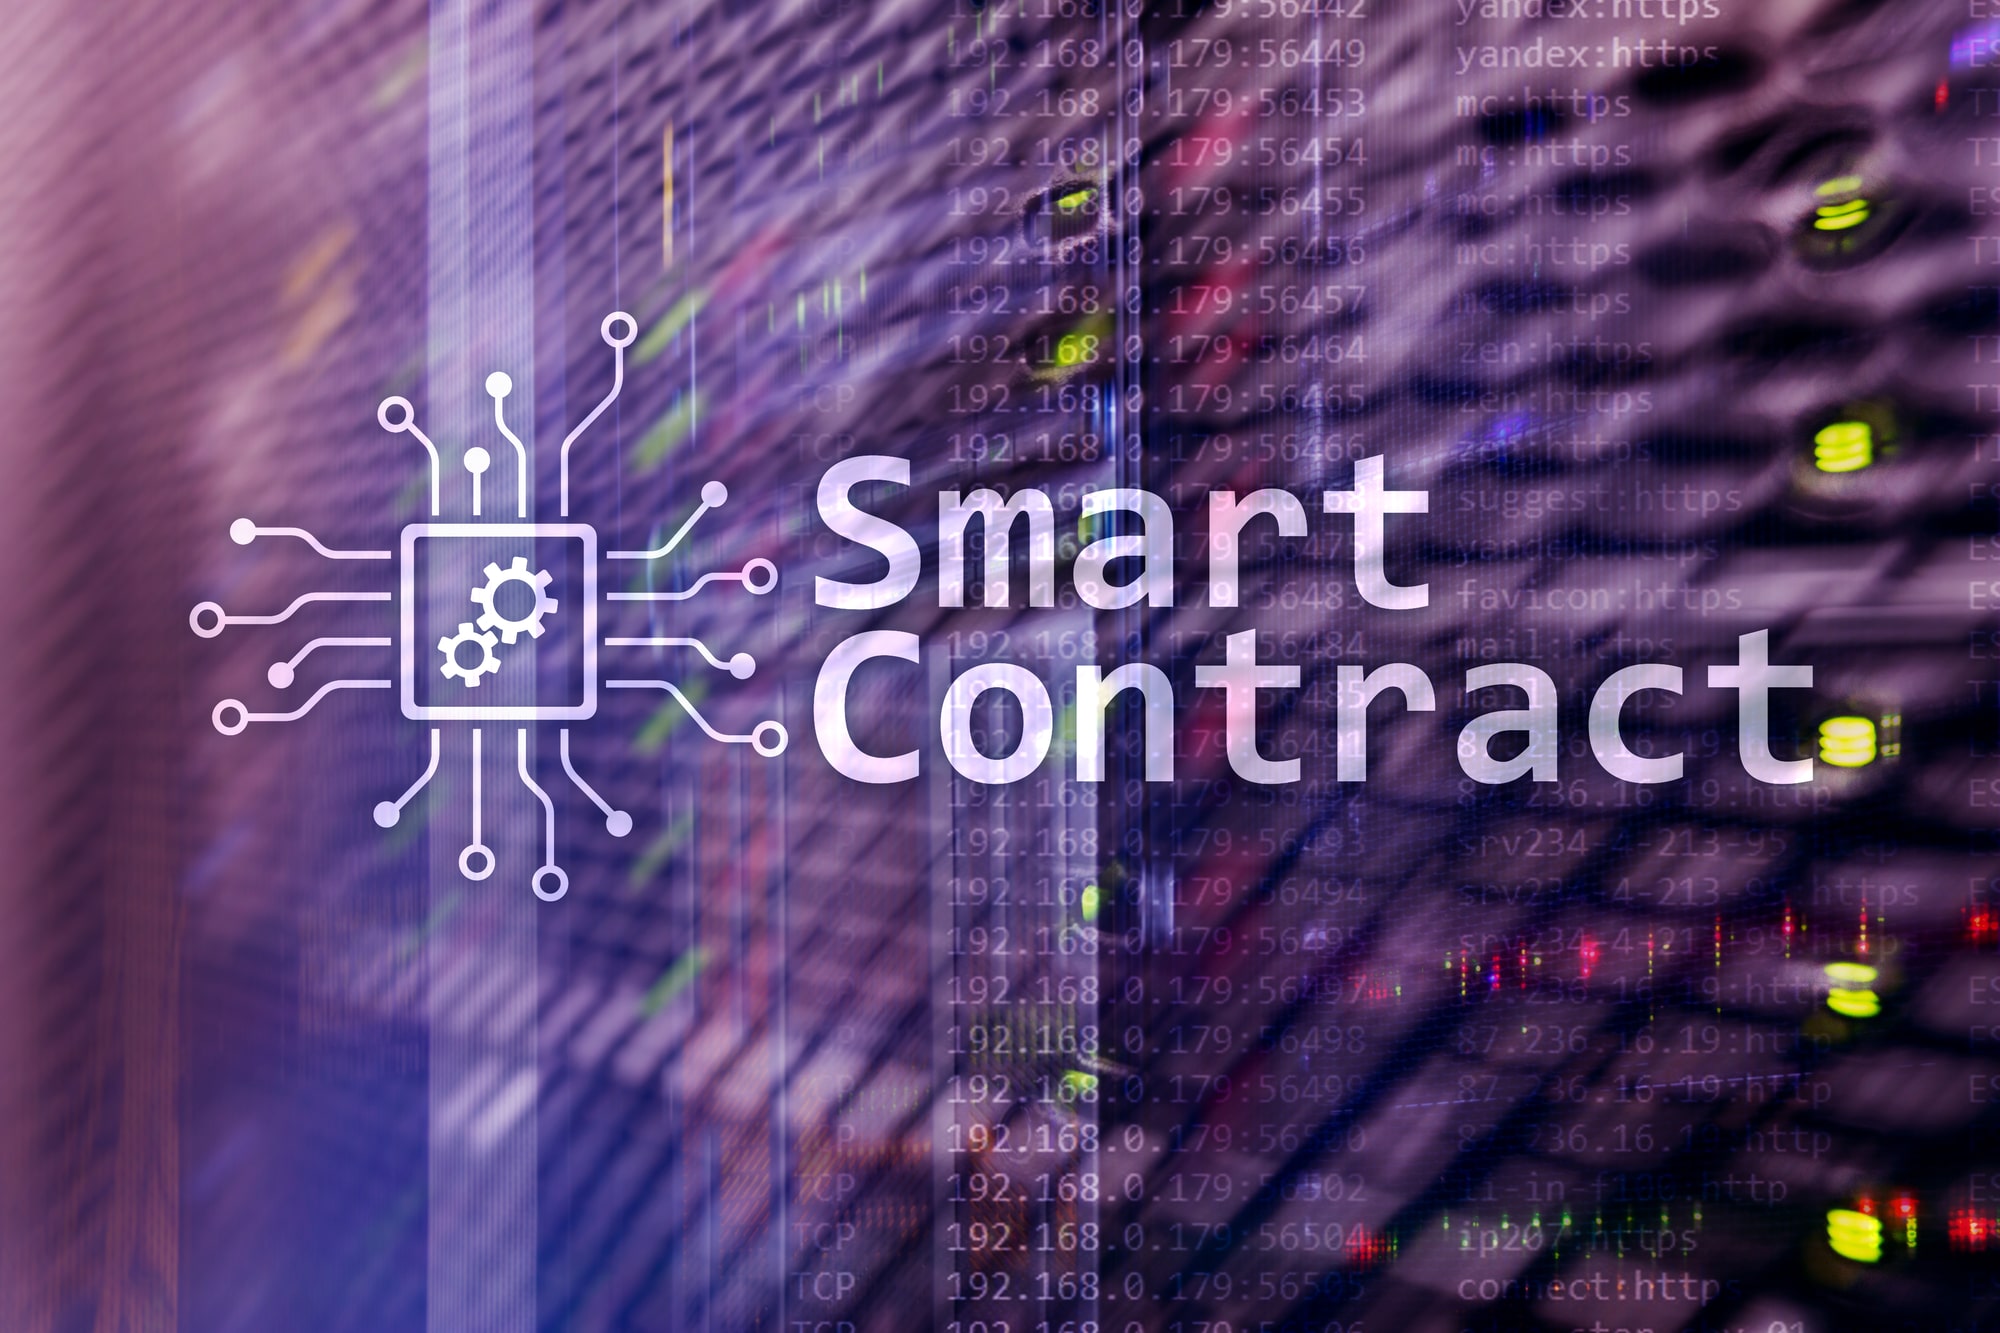 Cardano’s Alonzo upgrade brings smart contracts, DeFi and NFTs, competing with Ethereum